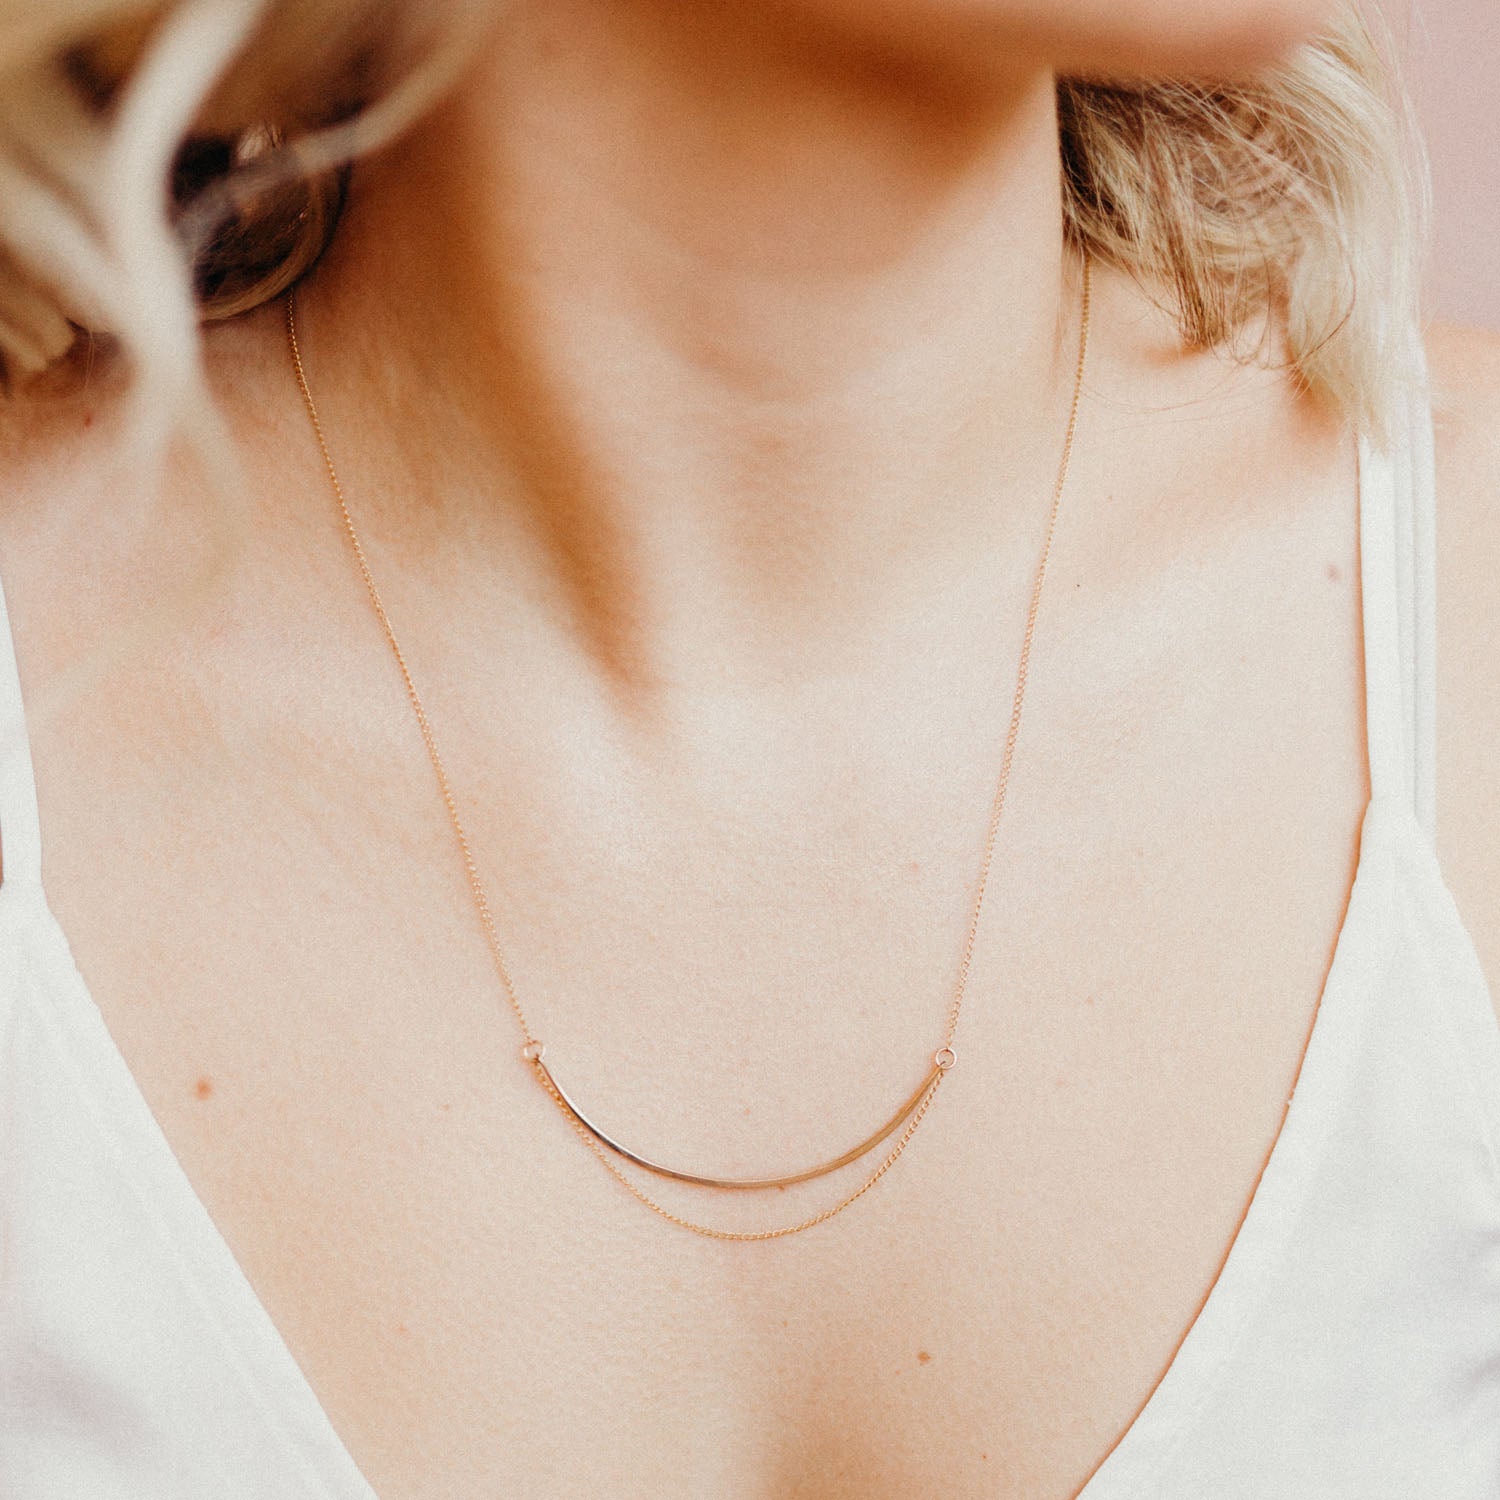 Delicate Chain Verge Necklace - Favor Jewelry